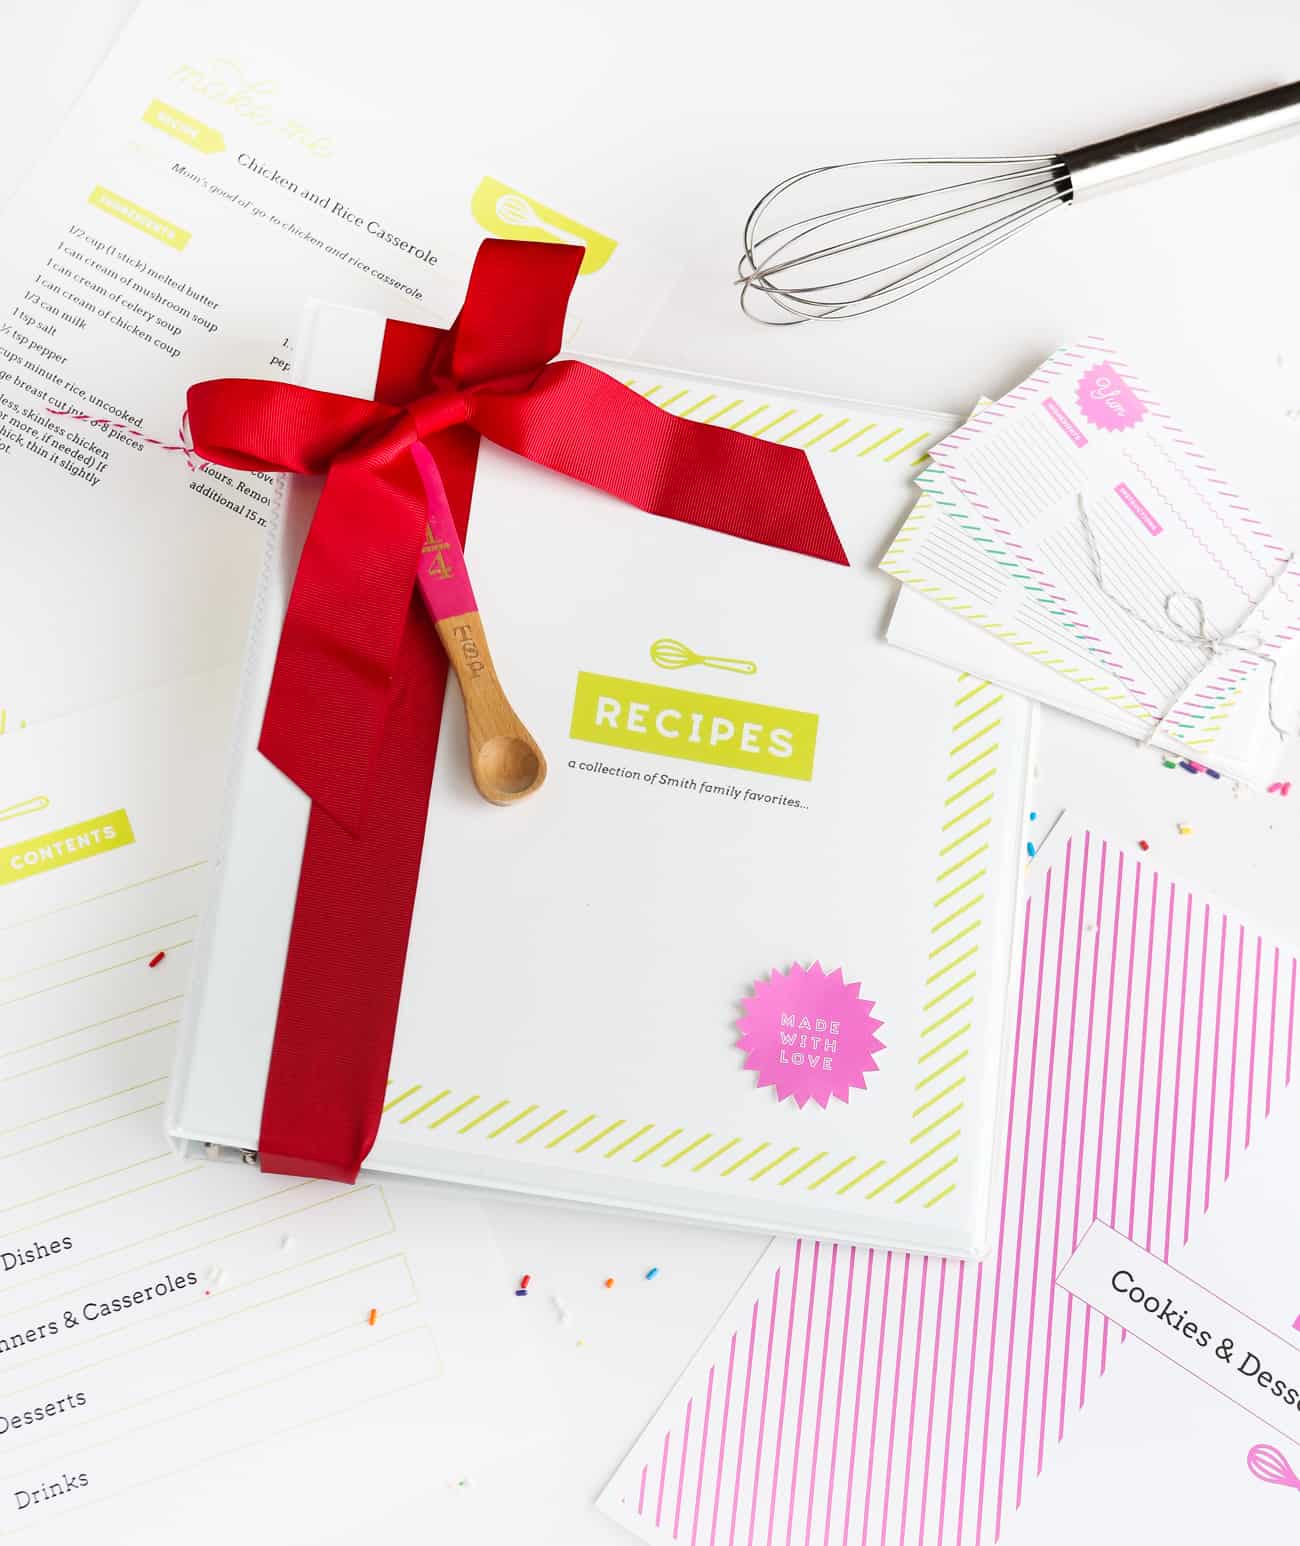 Organize your favorite recipes into a DIY recipe book with these fun and free printable recipe binder kit templates! Perfect for gifting to friends or family or just as a way to organize your favorite family recipes.  